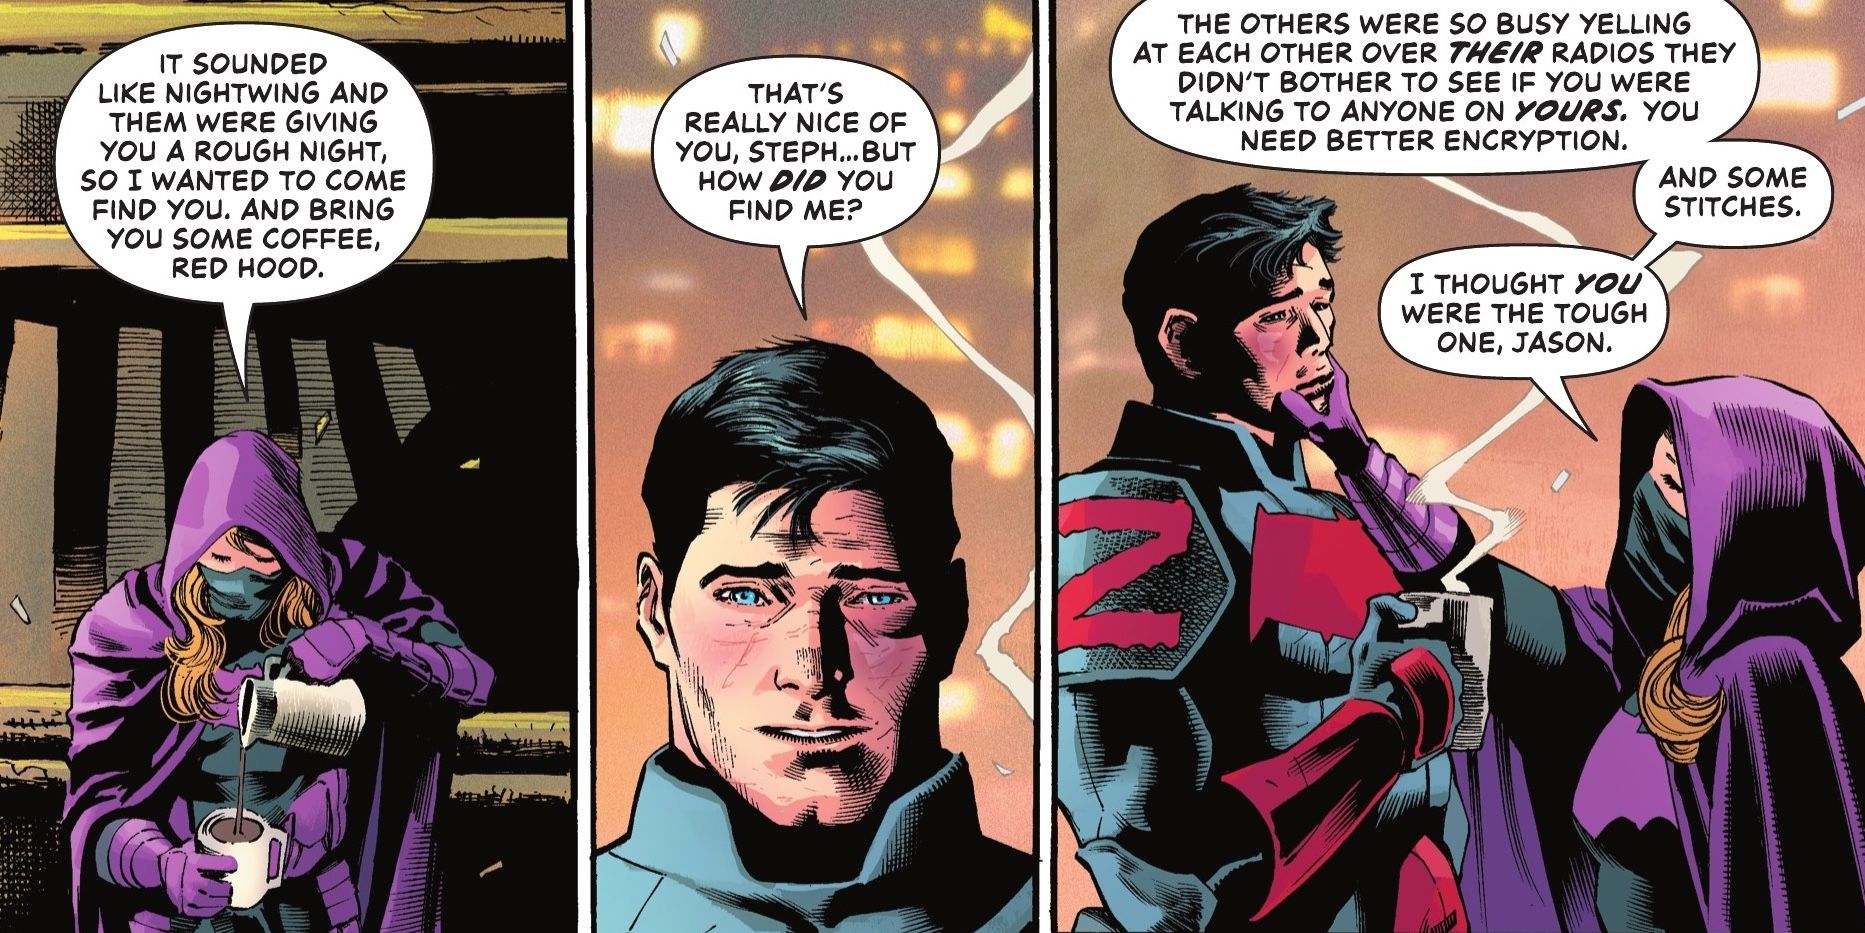 Red Hood Confirms the One Bat-Family Hero Who is Truly Jason’s Friend